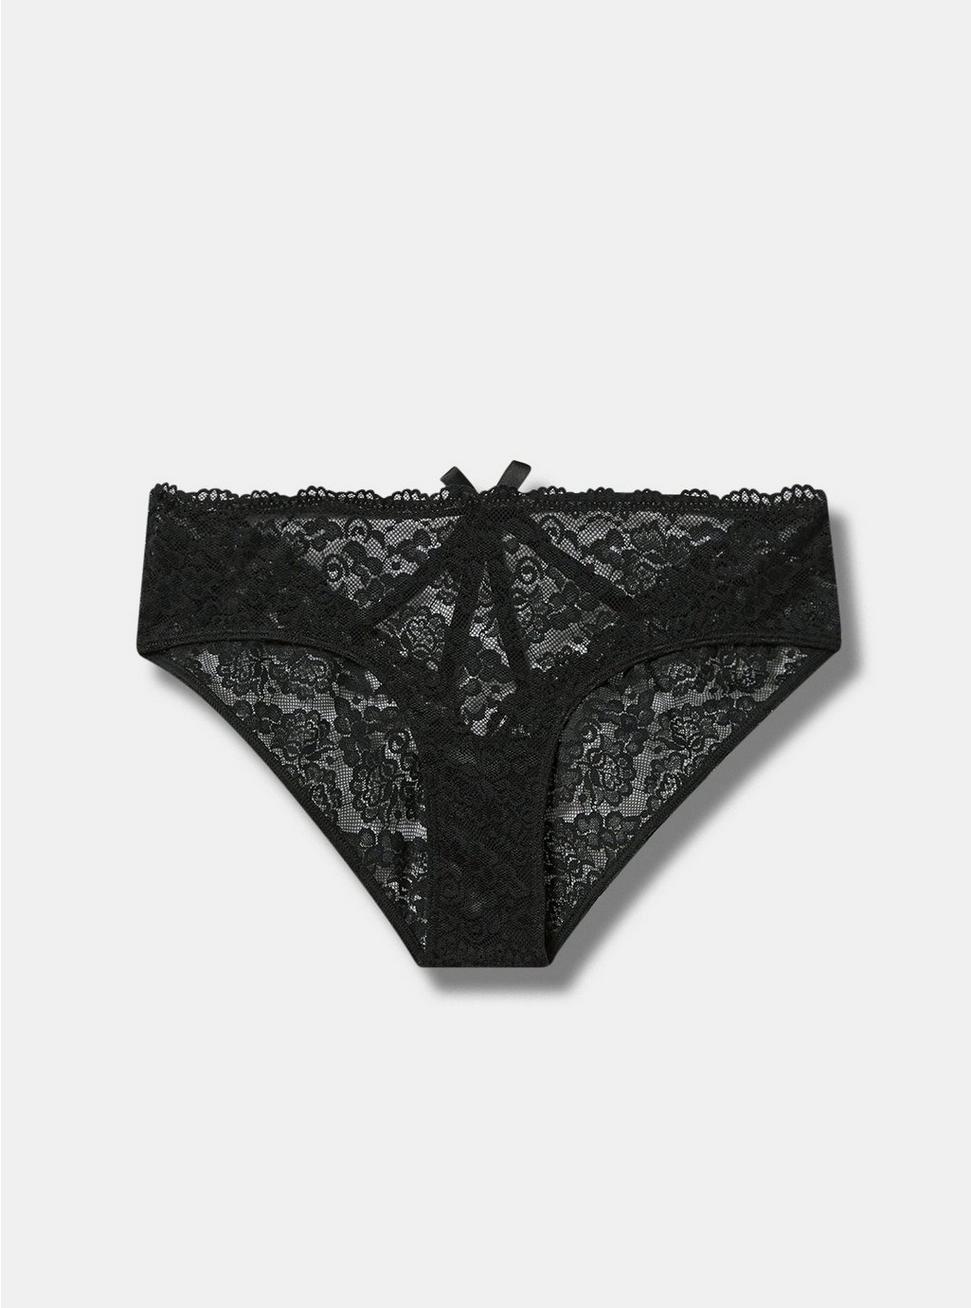 Simply Lace Mid-Rise Hipster Cage Back Panty, RICH BLACK, hi-res